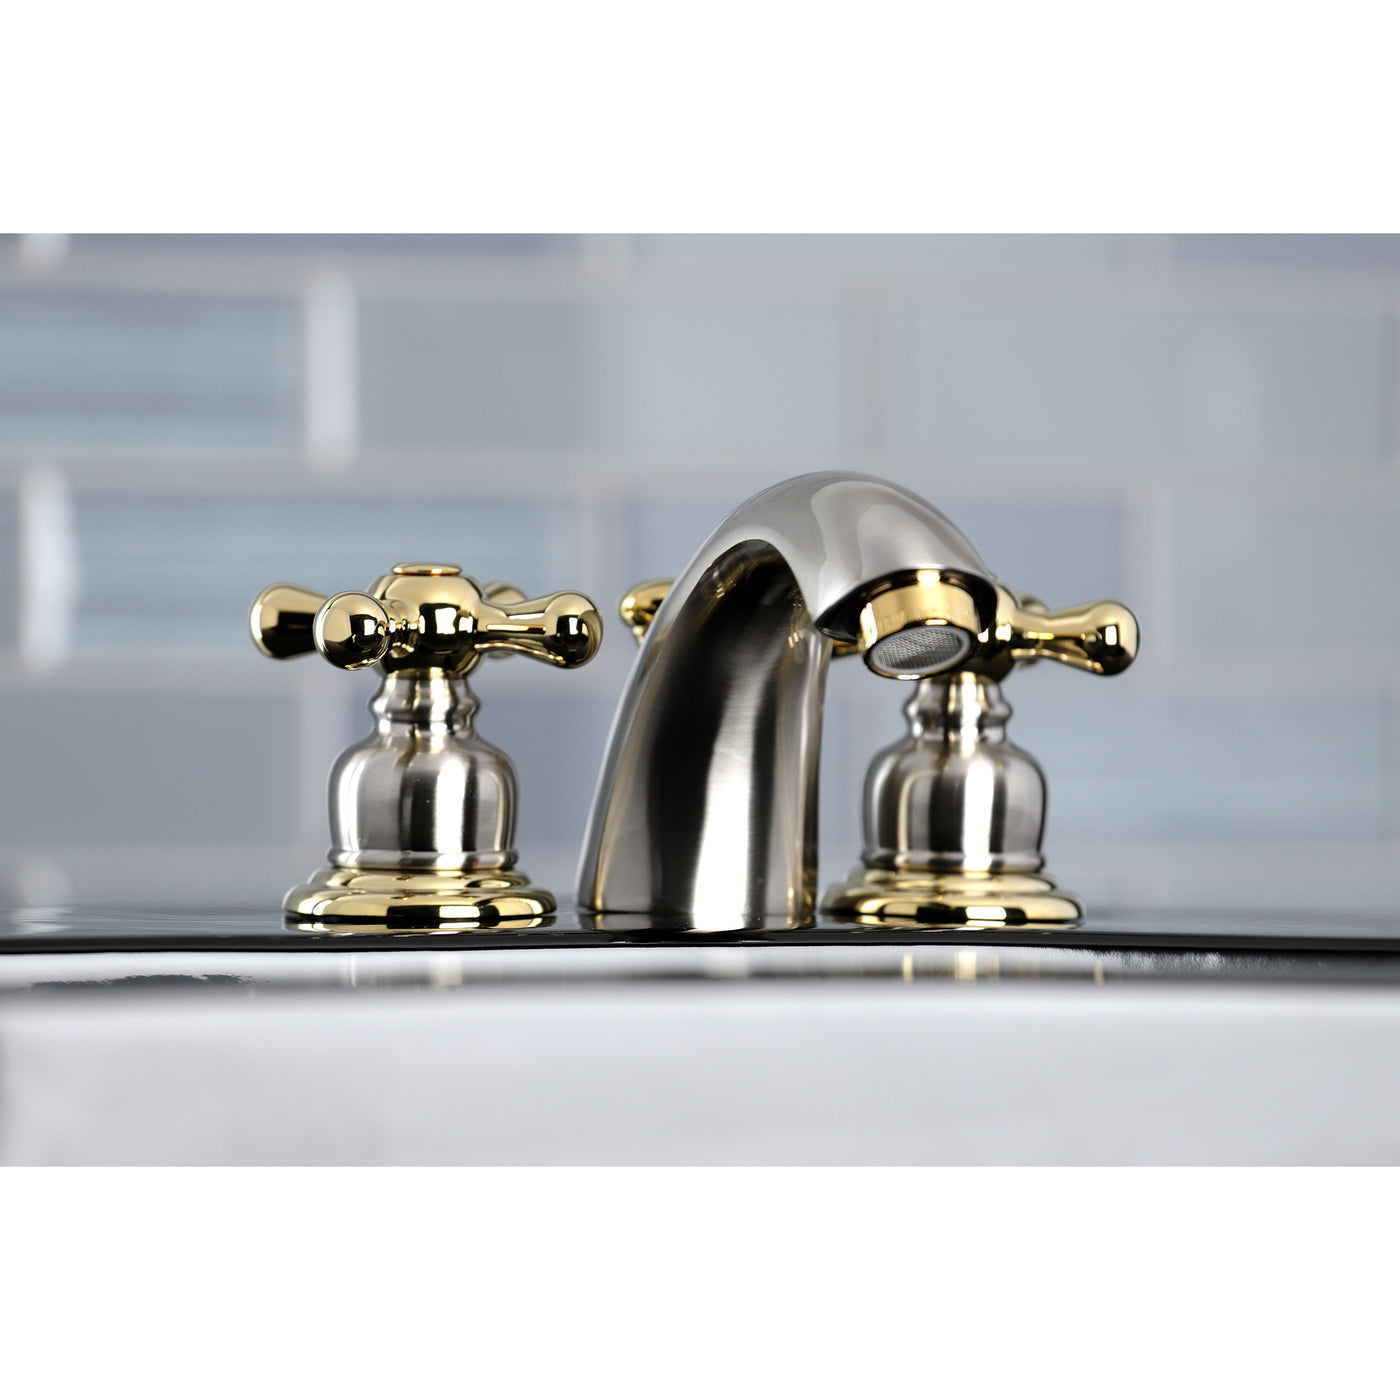 Elements of Design EB949AX Mini-Widespread Bathroom Faucet, Brushed Nickel/Polished Brass